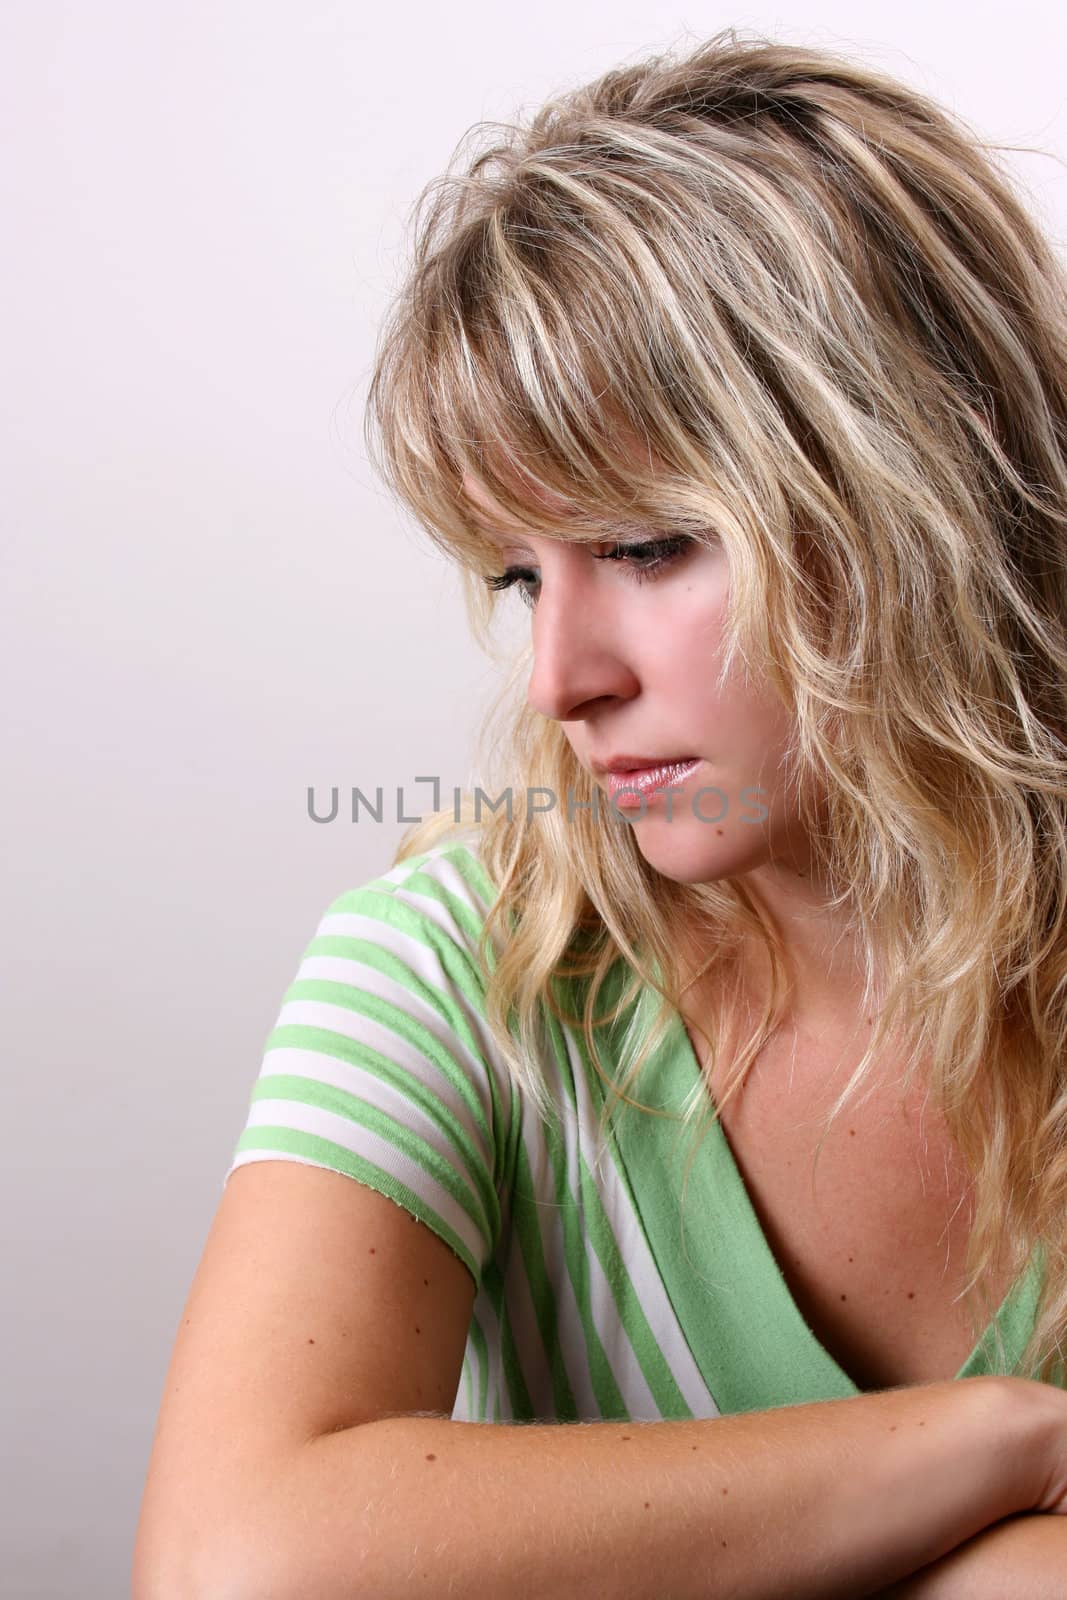 Blond Female model on a white background wearing a green top